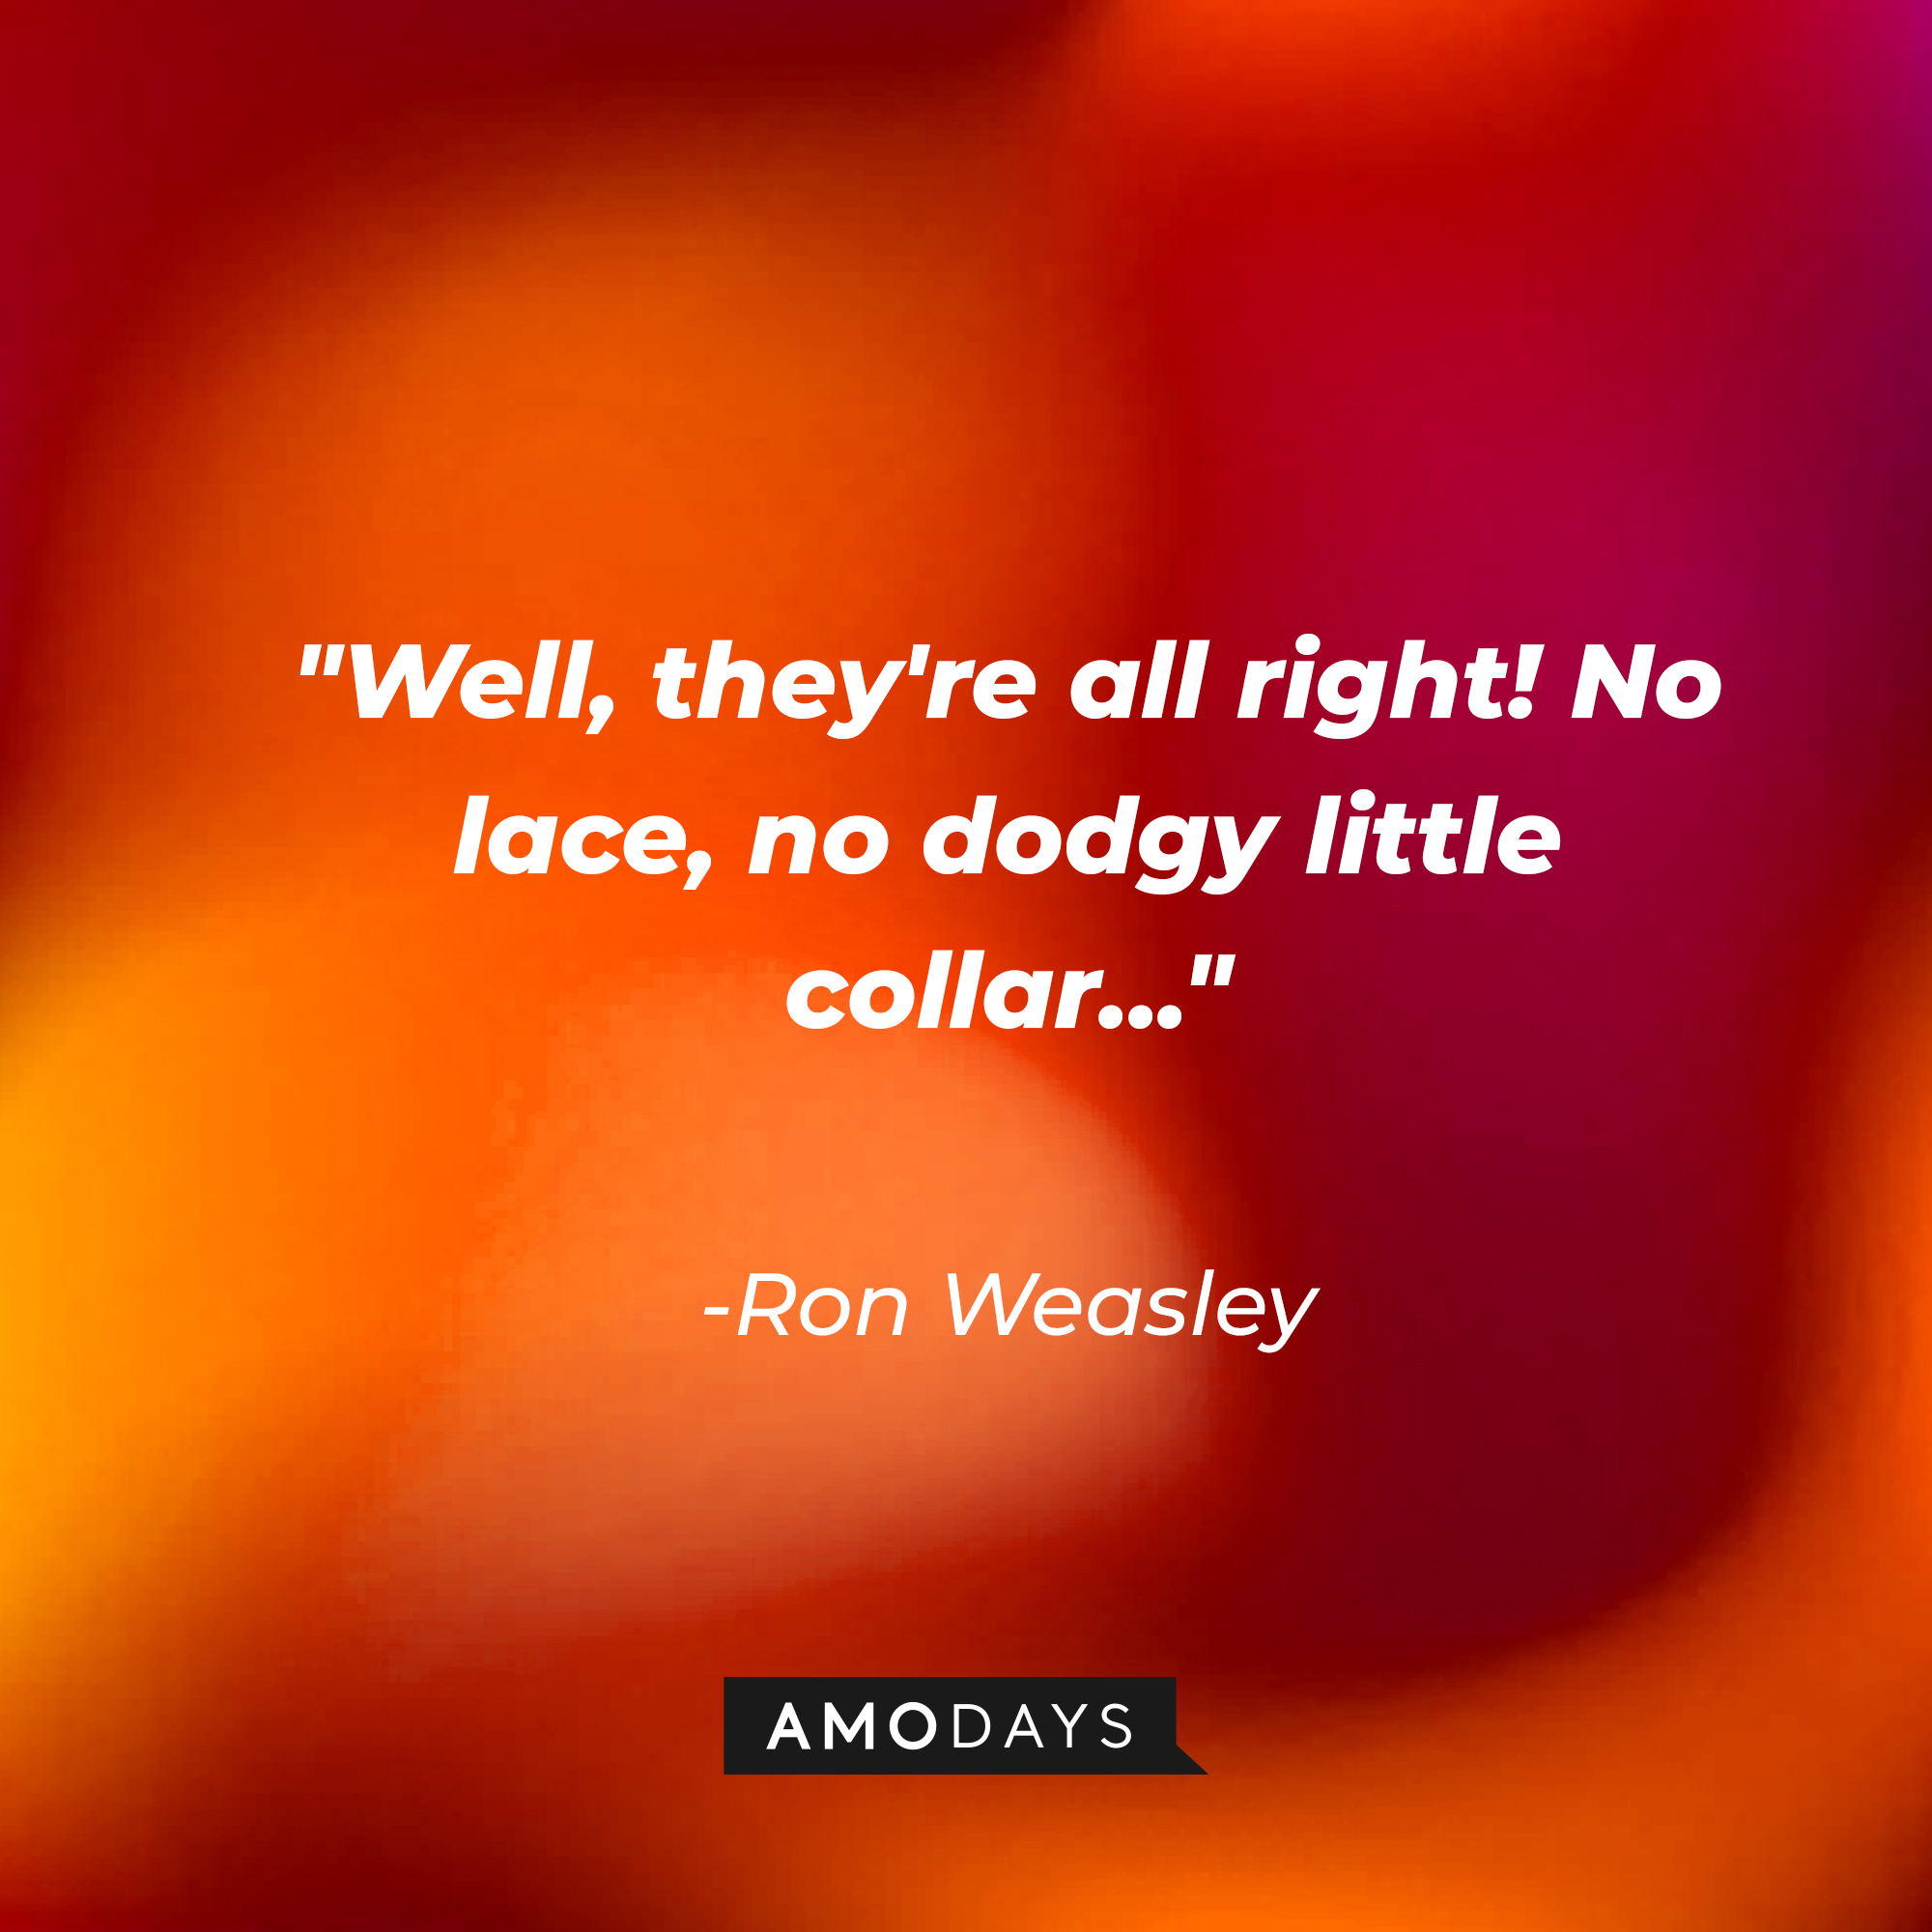 Ron Weasley's quote: "Well, they're all right! No lace, no dodgy little collar..." | Image: Amodays